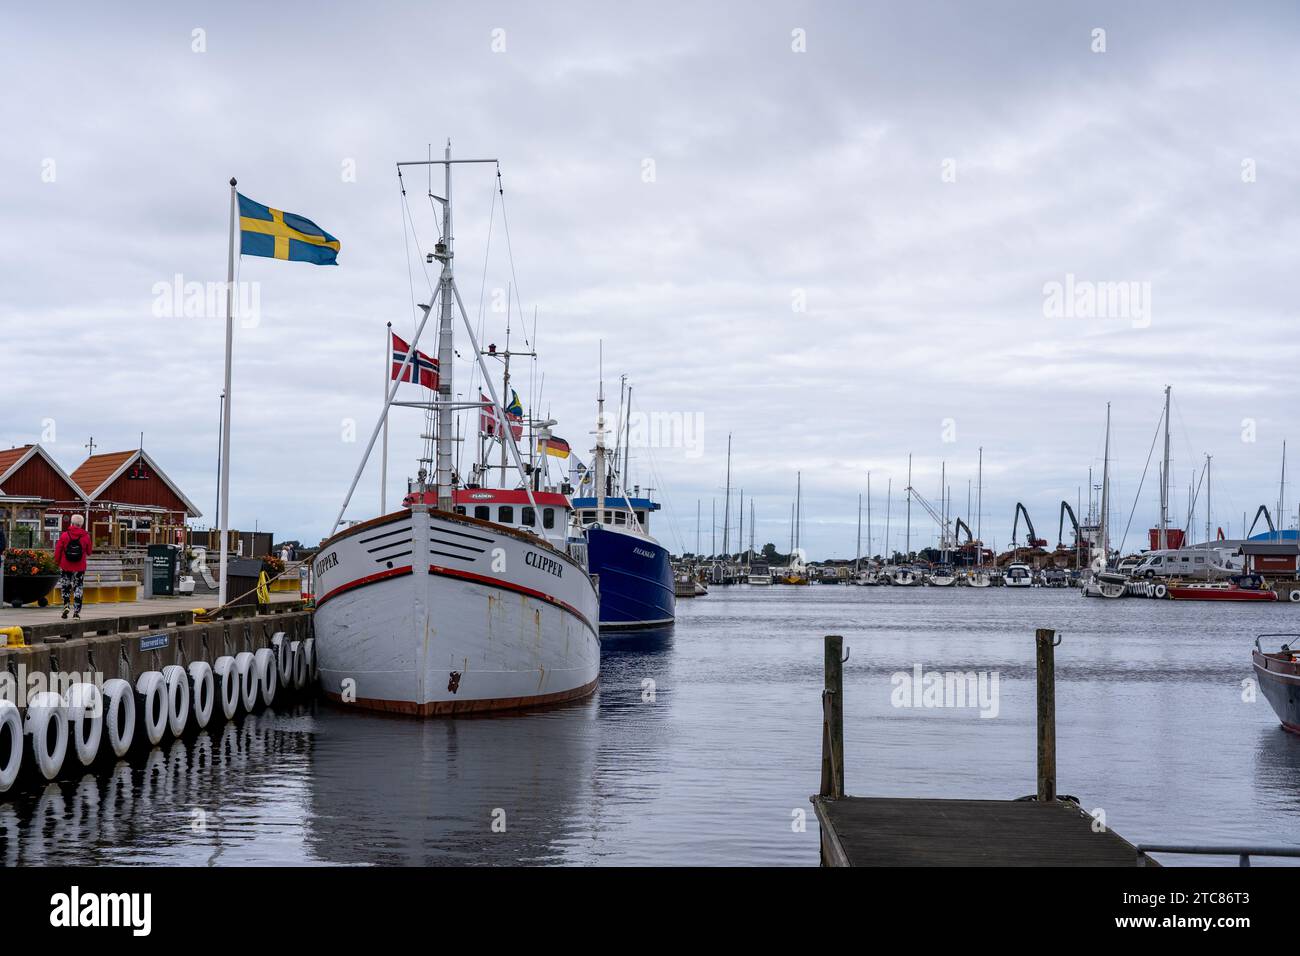 Recreational boats docked at a marina on a calm day, with their respective flags waving in the light breeze in Sweden Stock Photo